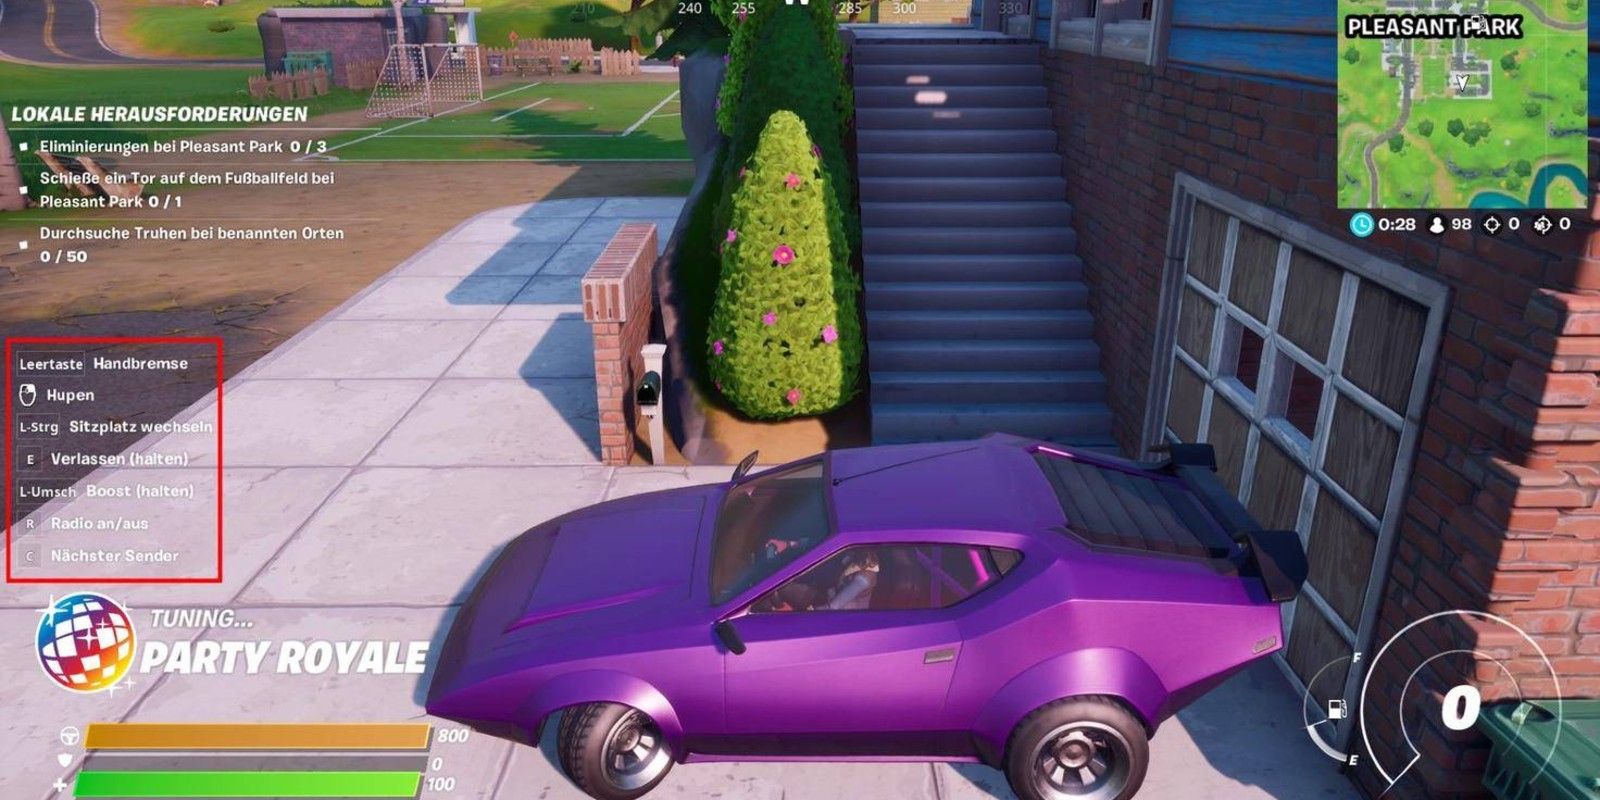 A player turns the station to Party Royale in the car in Fortnite Season 3